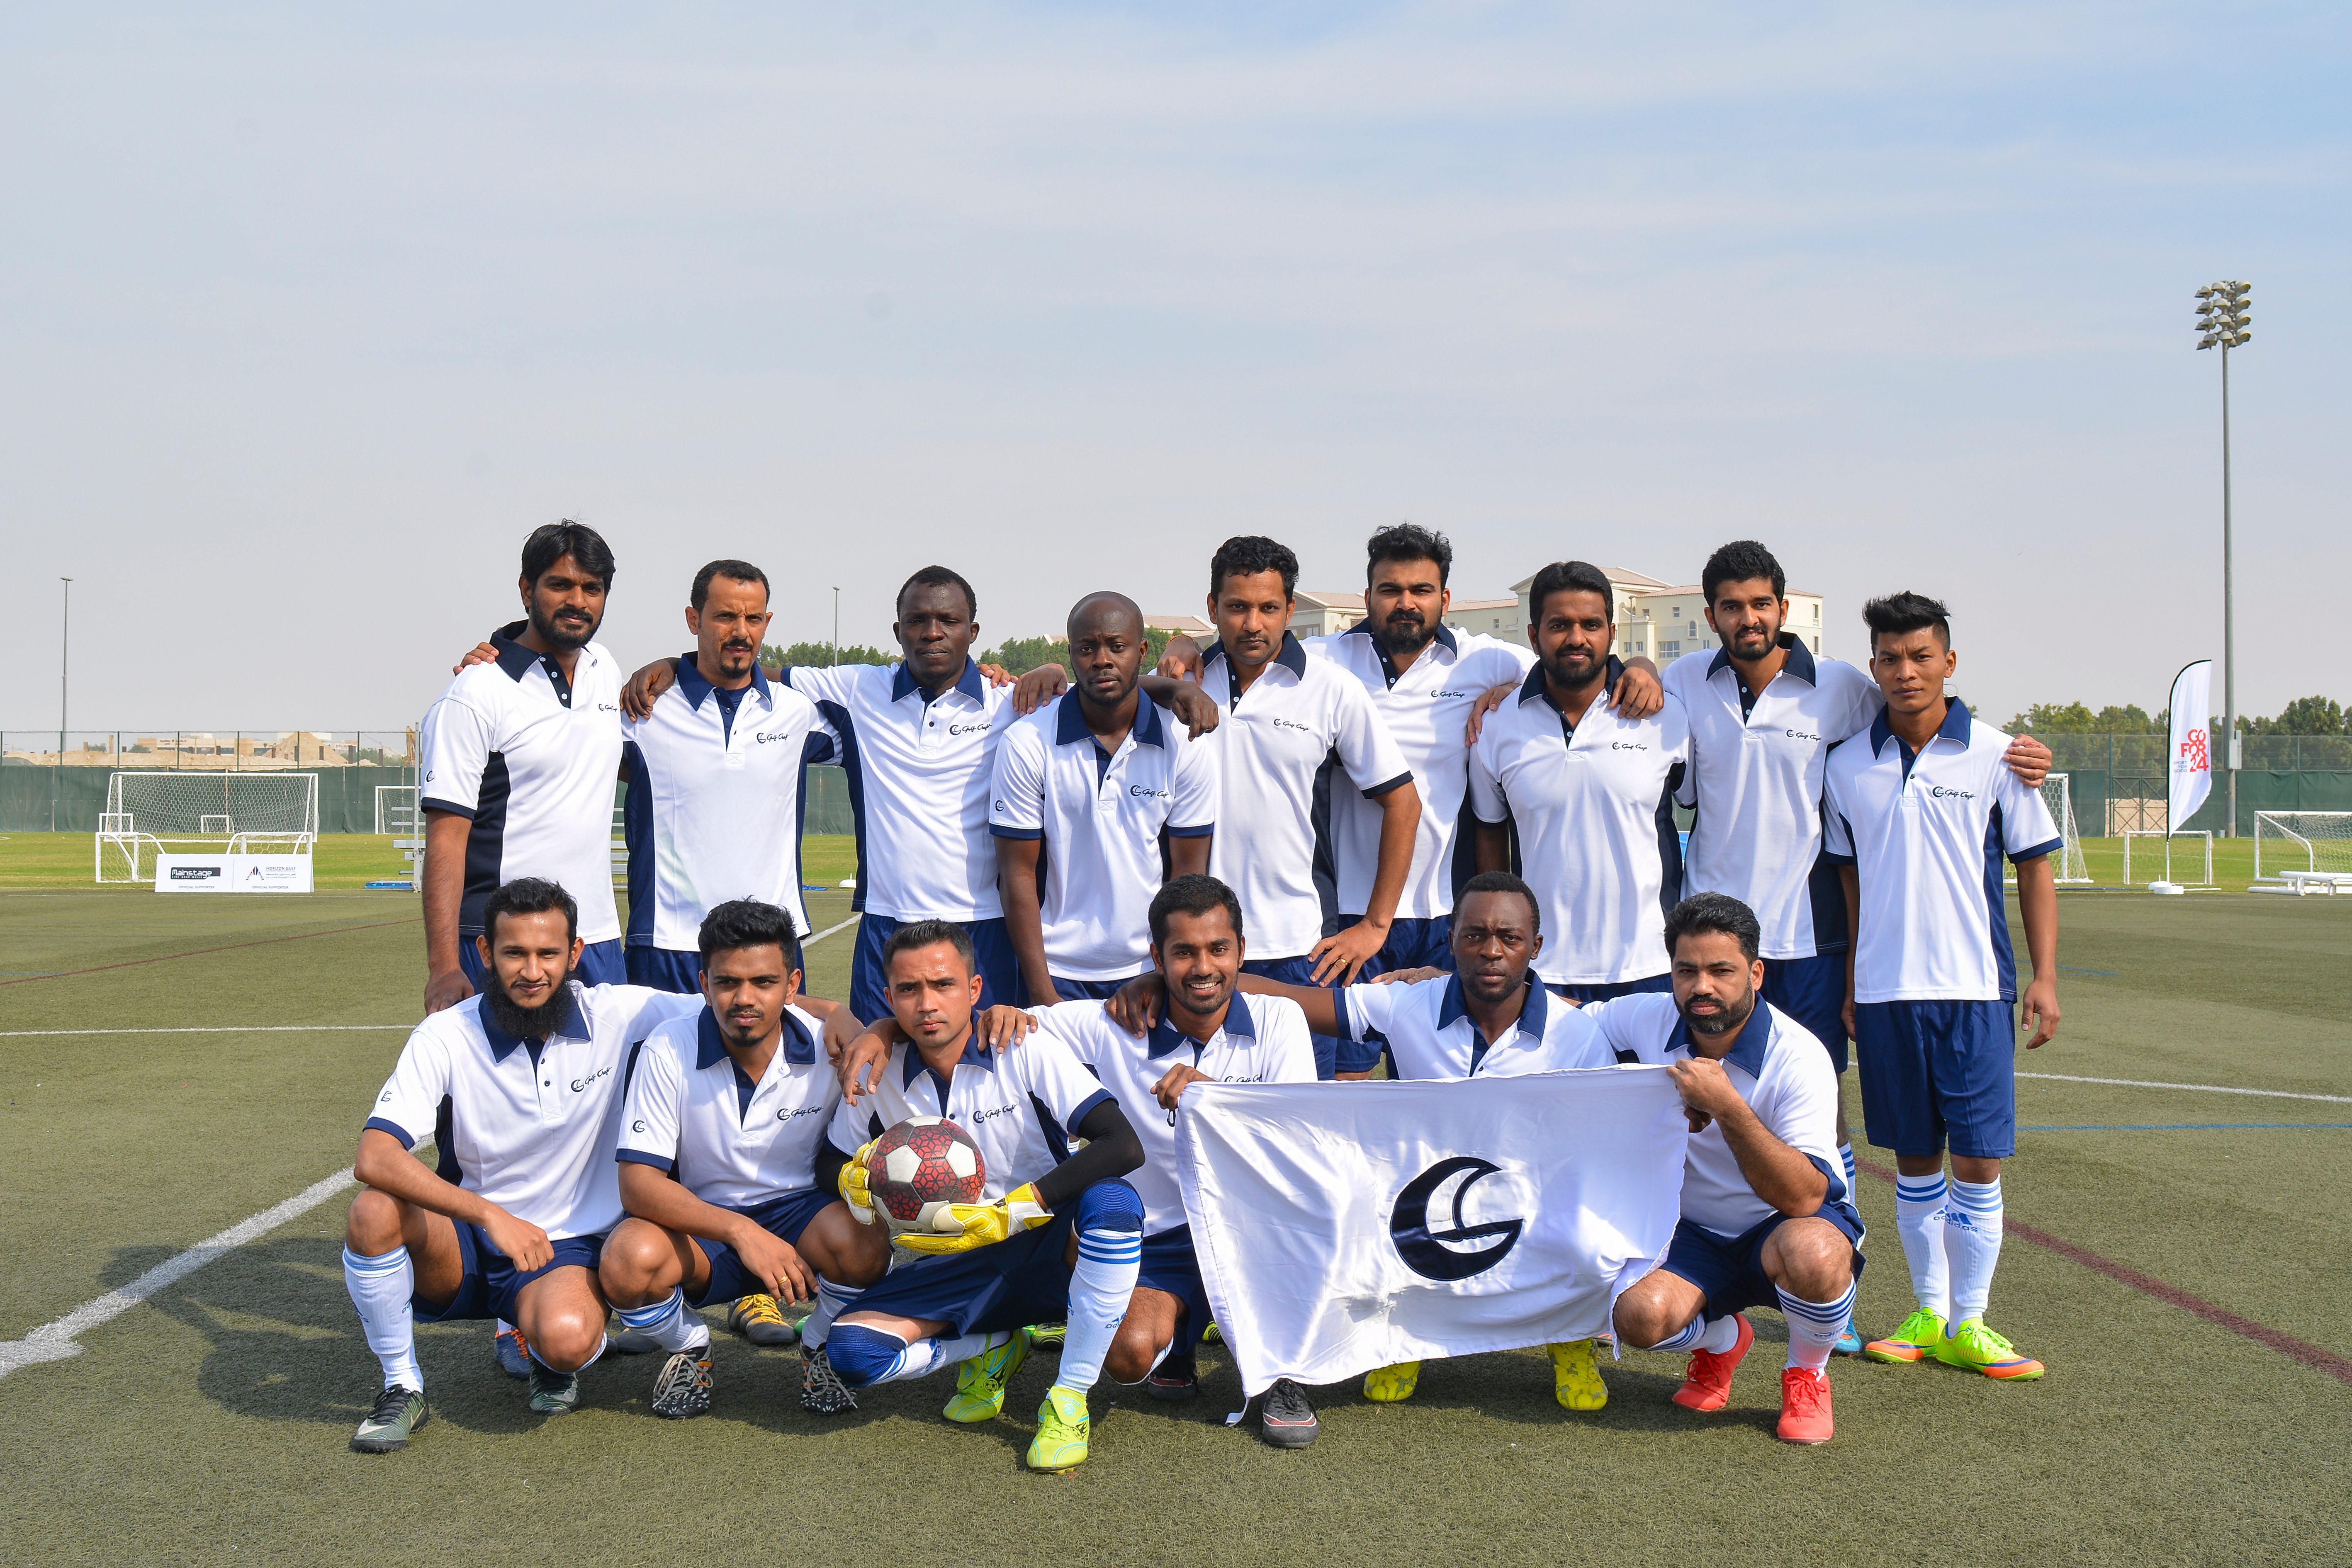 Gulf Craft football team at the Oceans 24 Hour Football Challenge